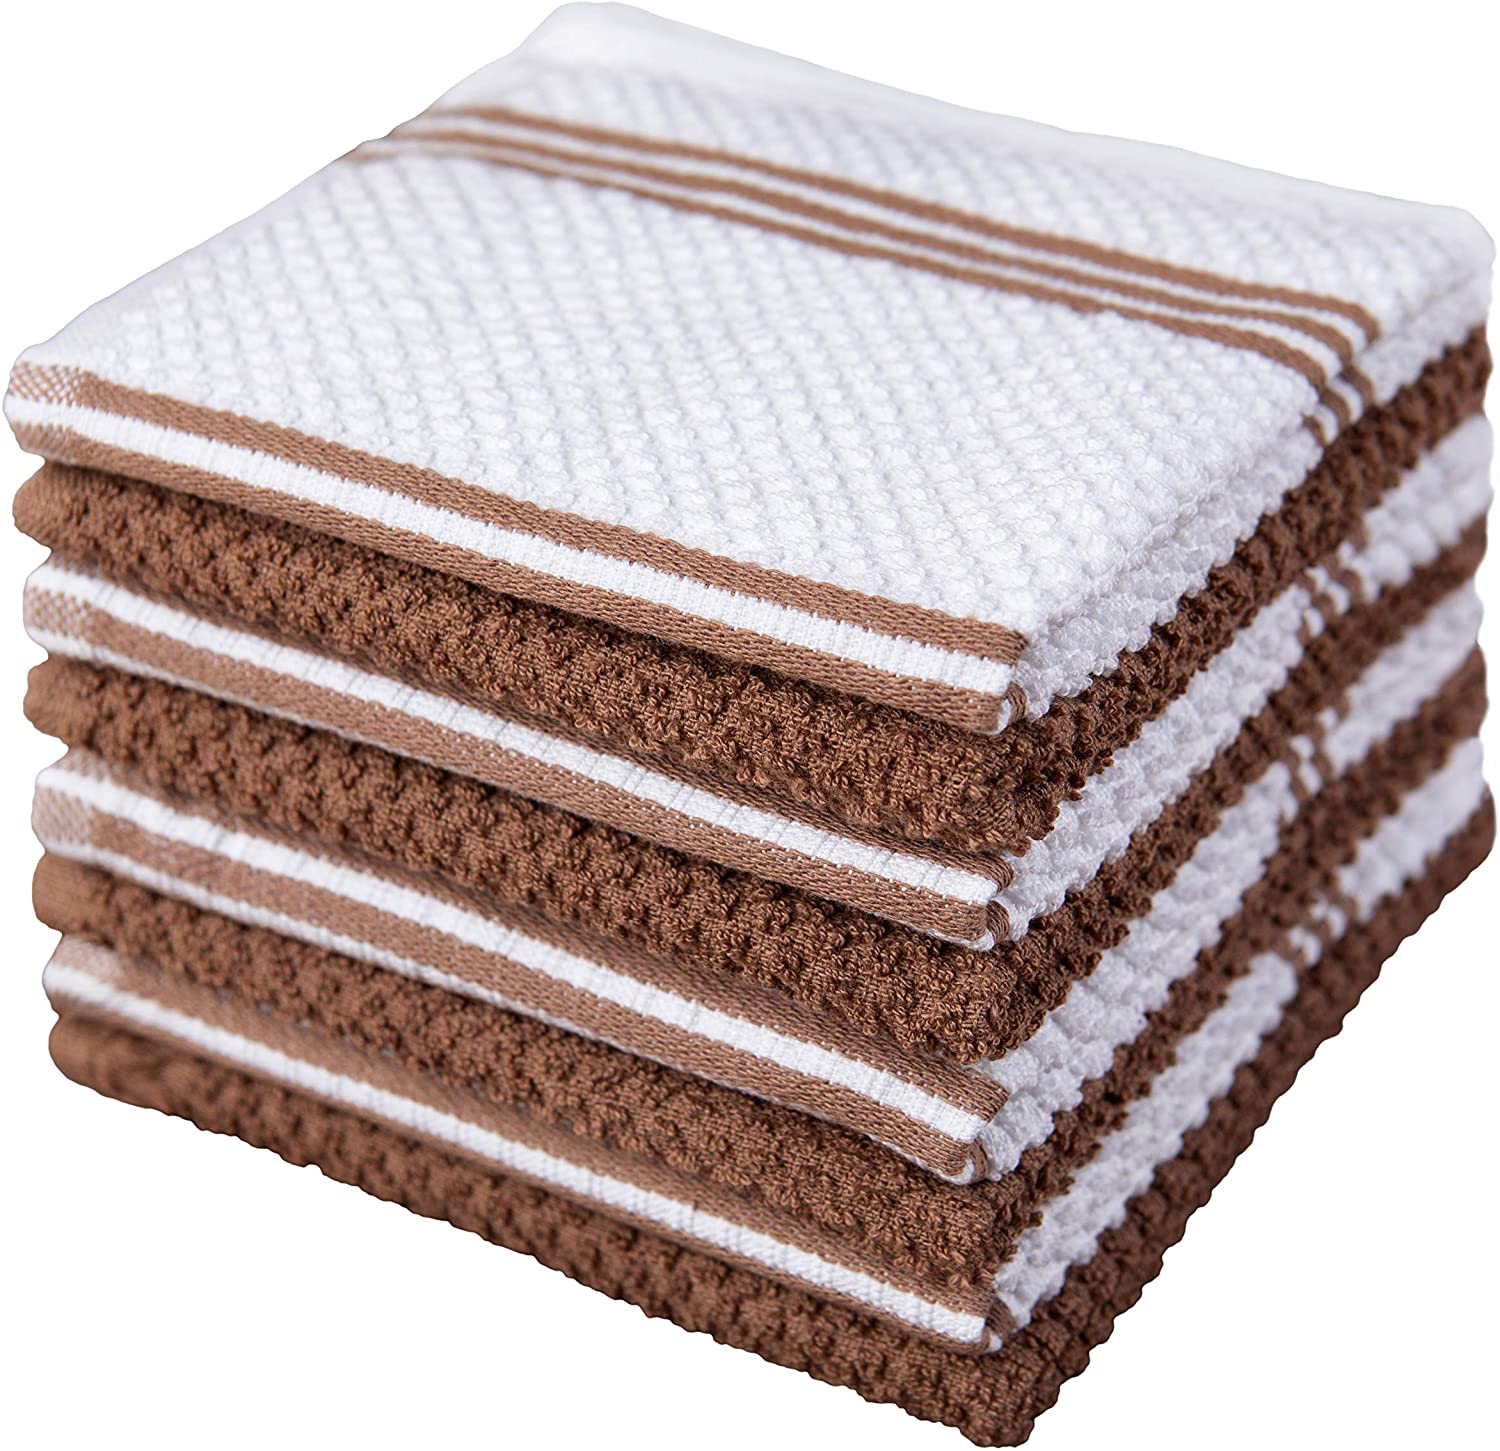 ISTOWEL Decorative Kitchen Towels and Dishcloths Sets - 12 x 20 Cotton  Terry Dish Towels for Drying Dishes and Blotting Spills - Cook Themed